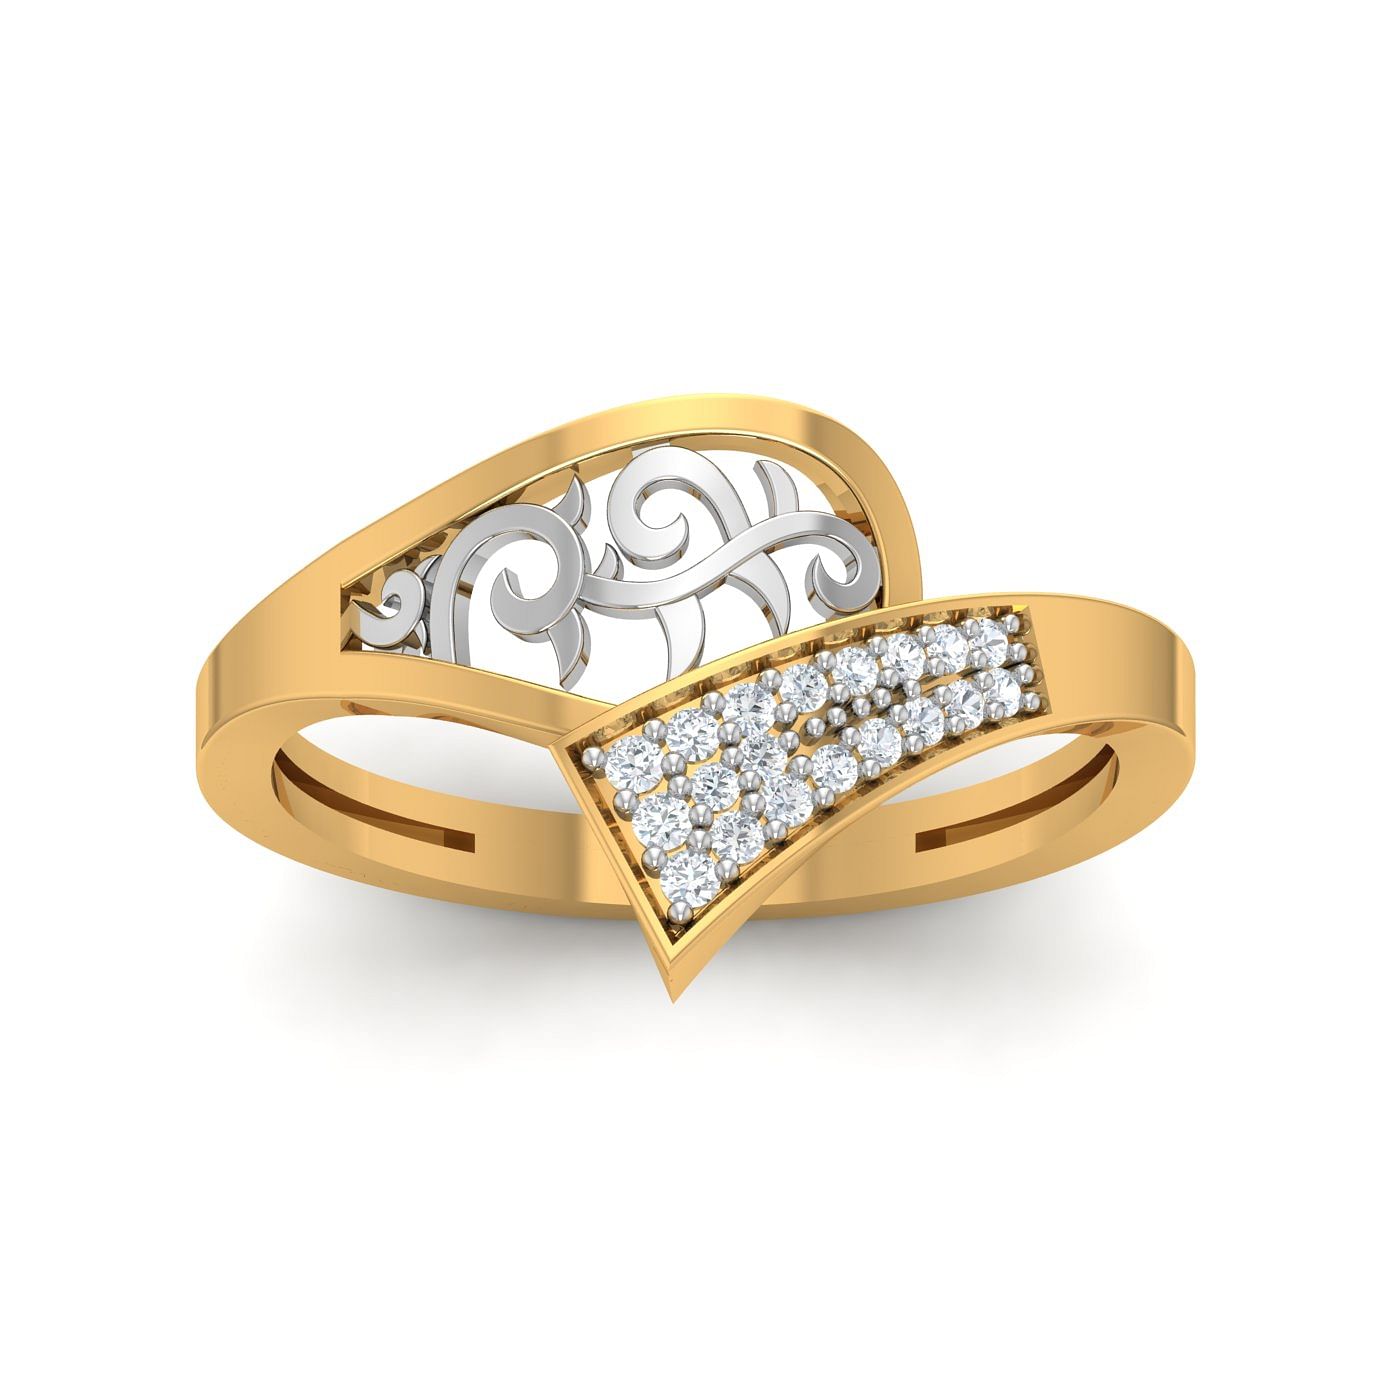 Carving Style Yellow Gold Diamond Ring For Women